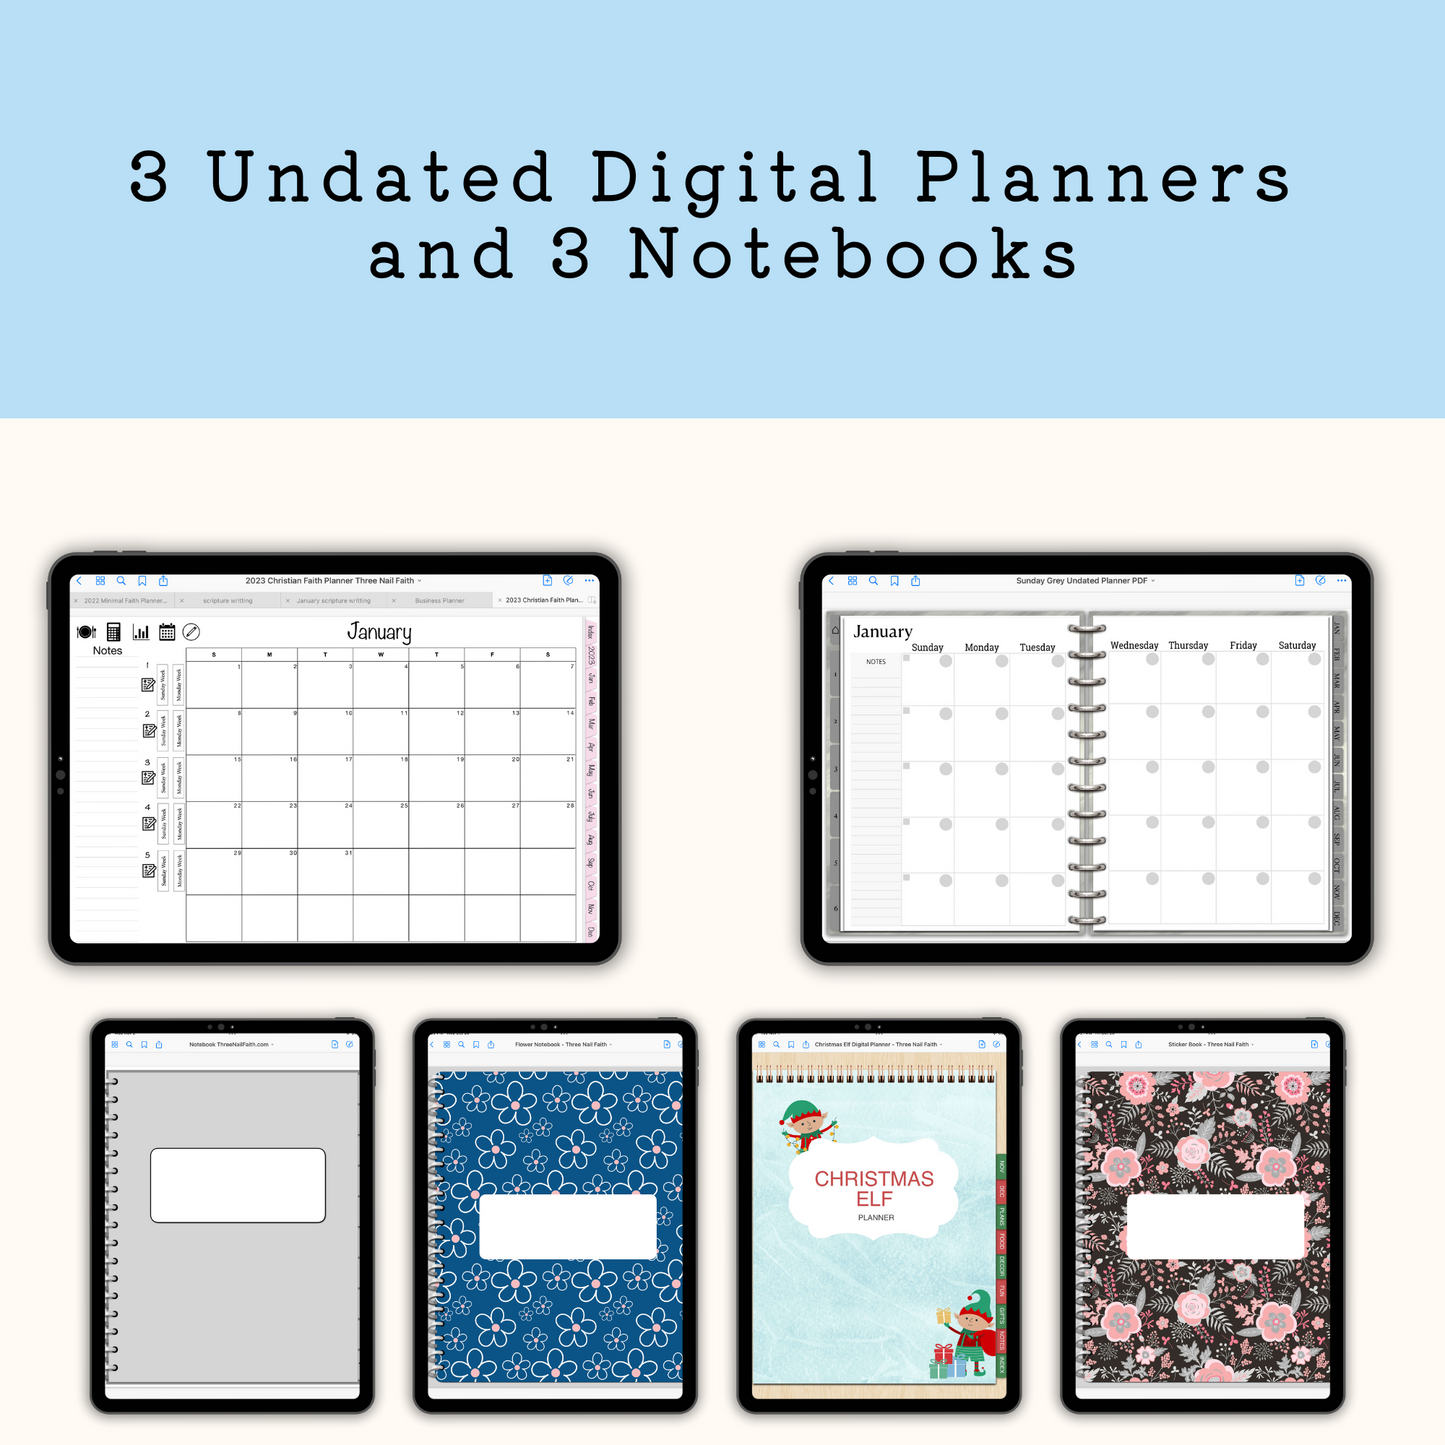 You will receive 3 undated planners, and 3 notebooks